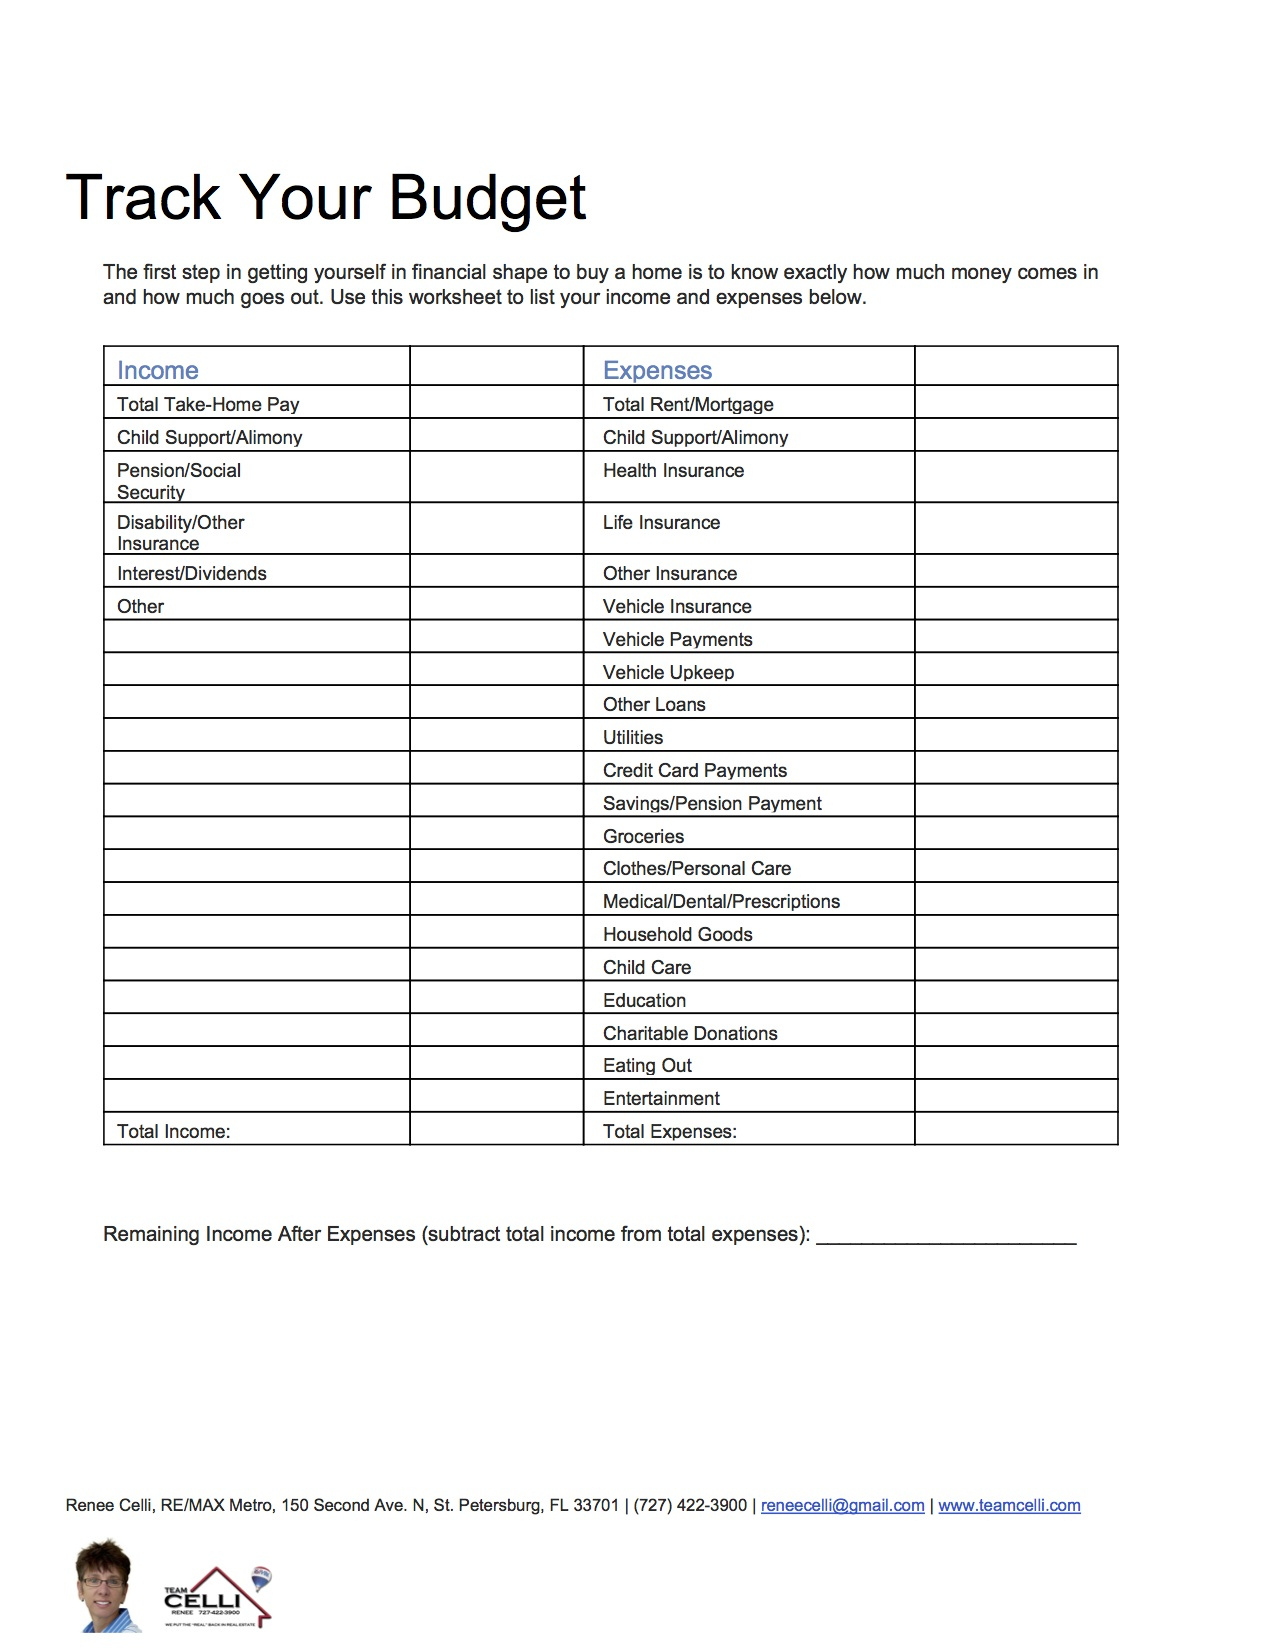 Use A Budget Worksheet To Prepare For Buying A Home